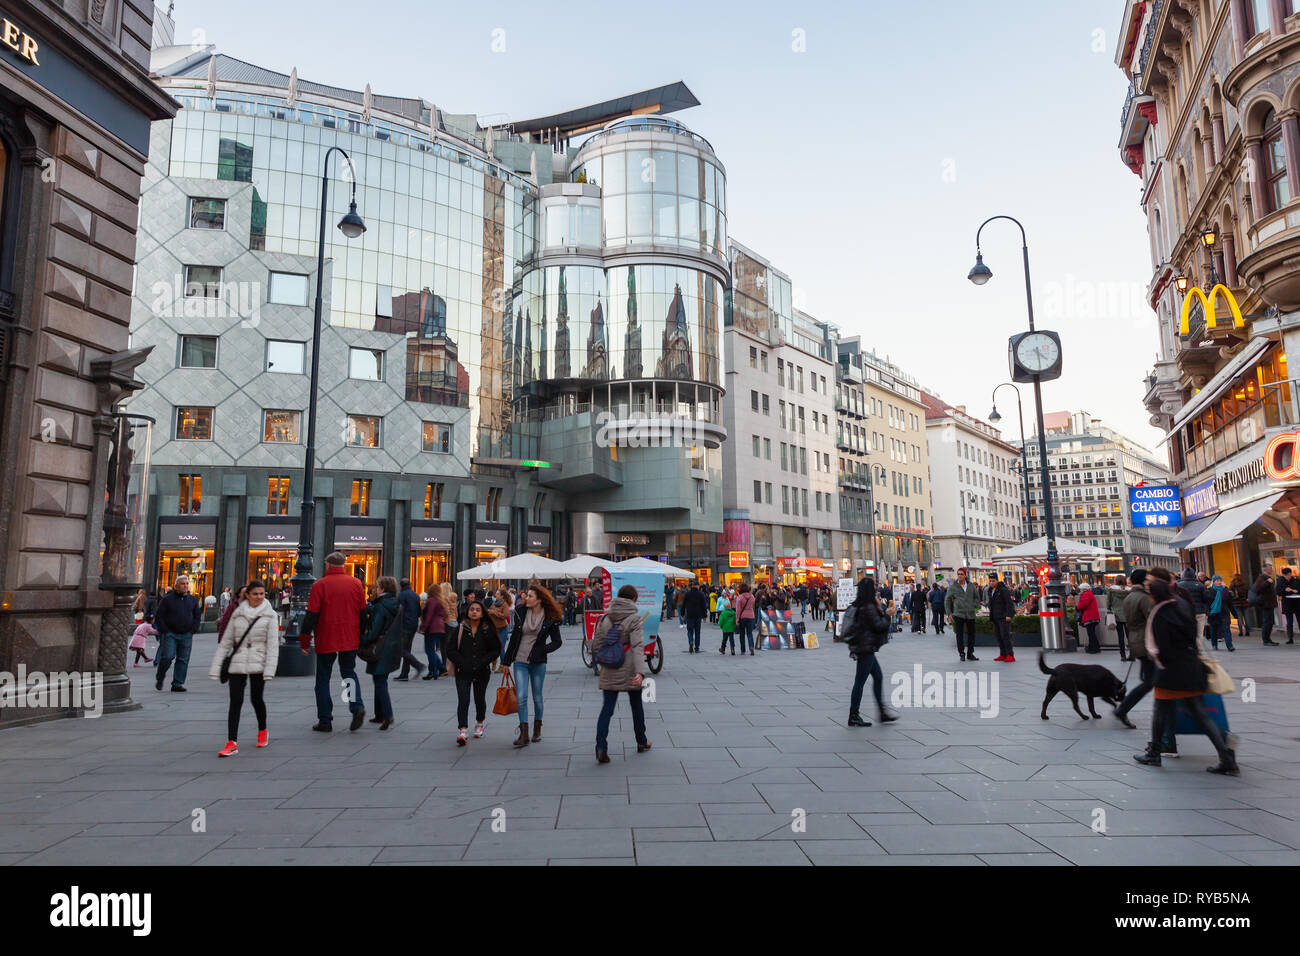 Vienna, Austria - November 2, 2015: Tourists and ordinary people walk on the Stephansplatz, it is a square at the geographical centre of Vienna Stock Photo